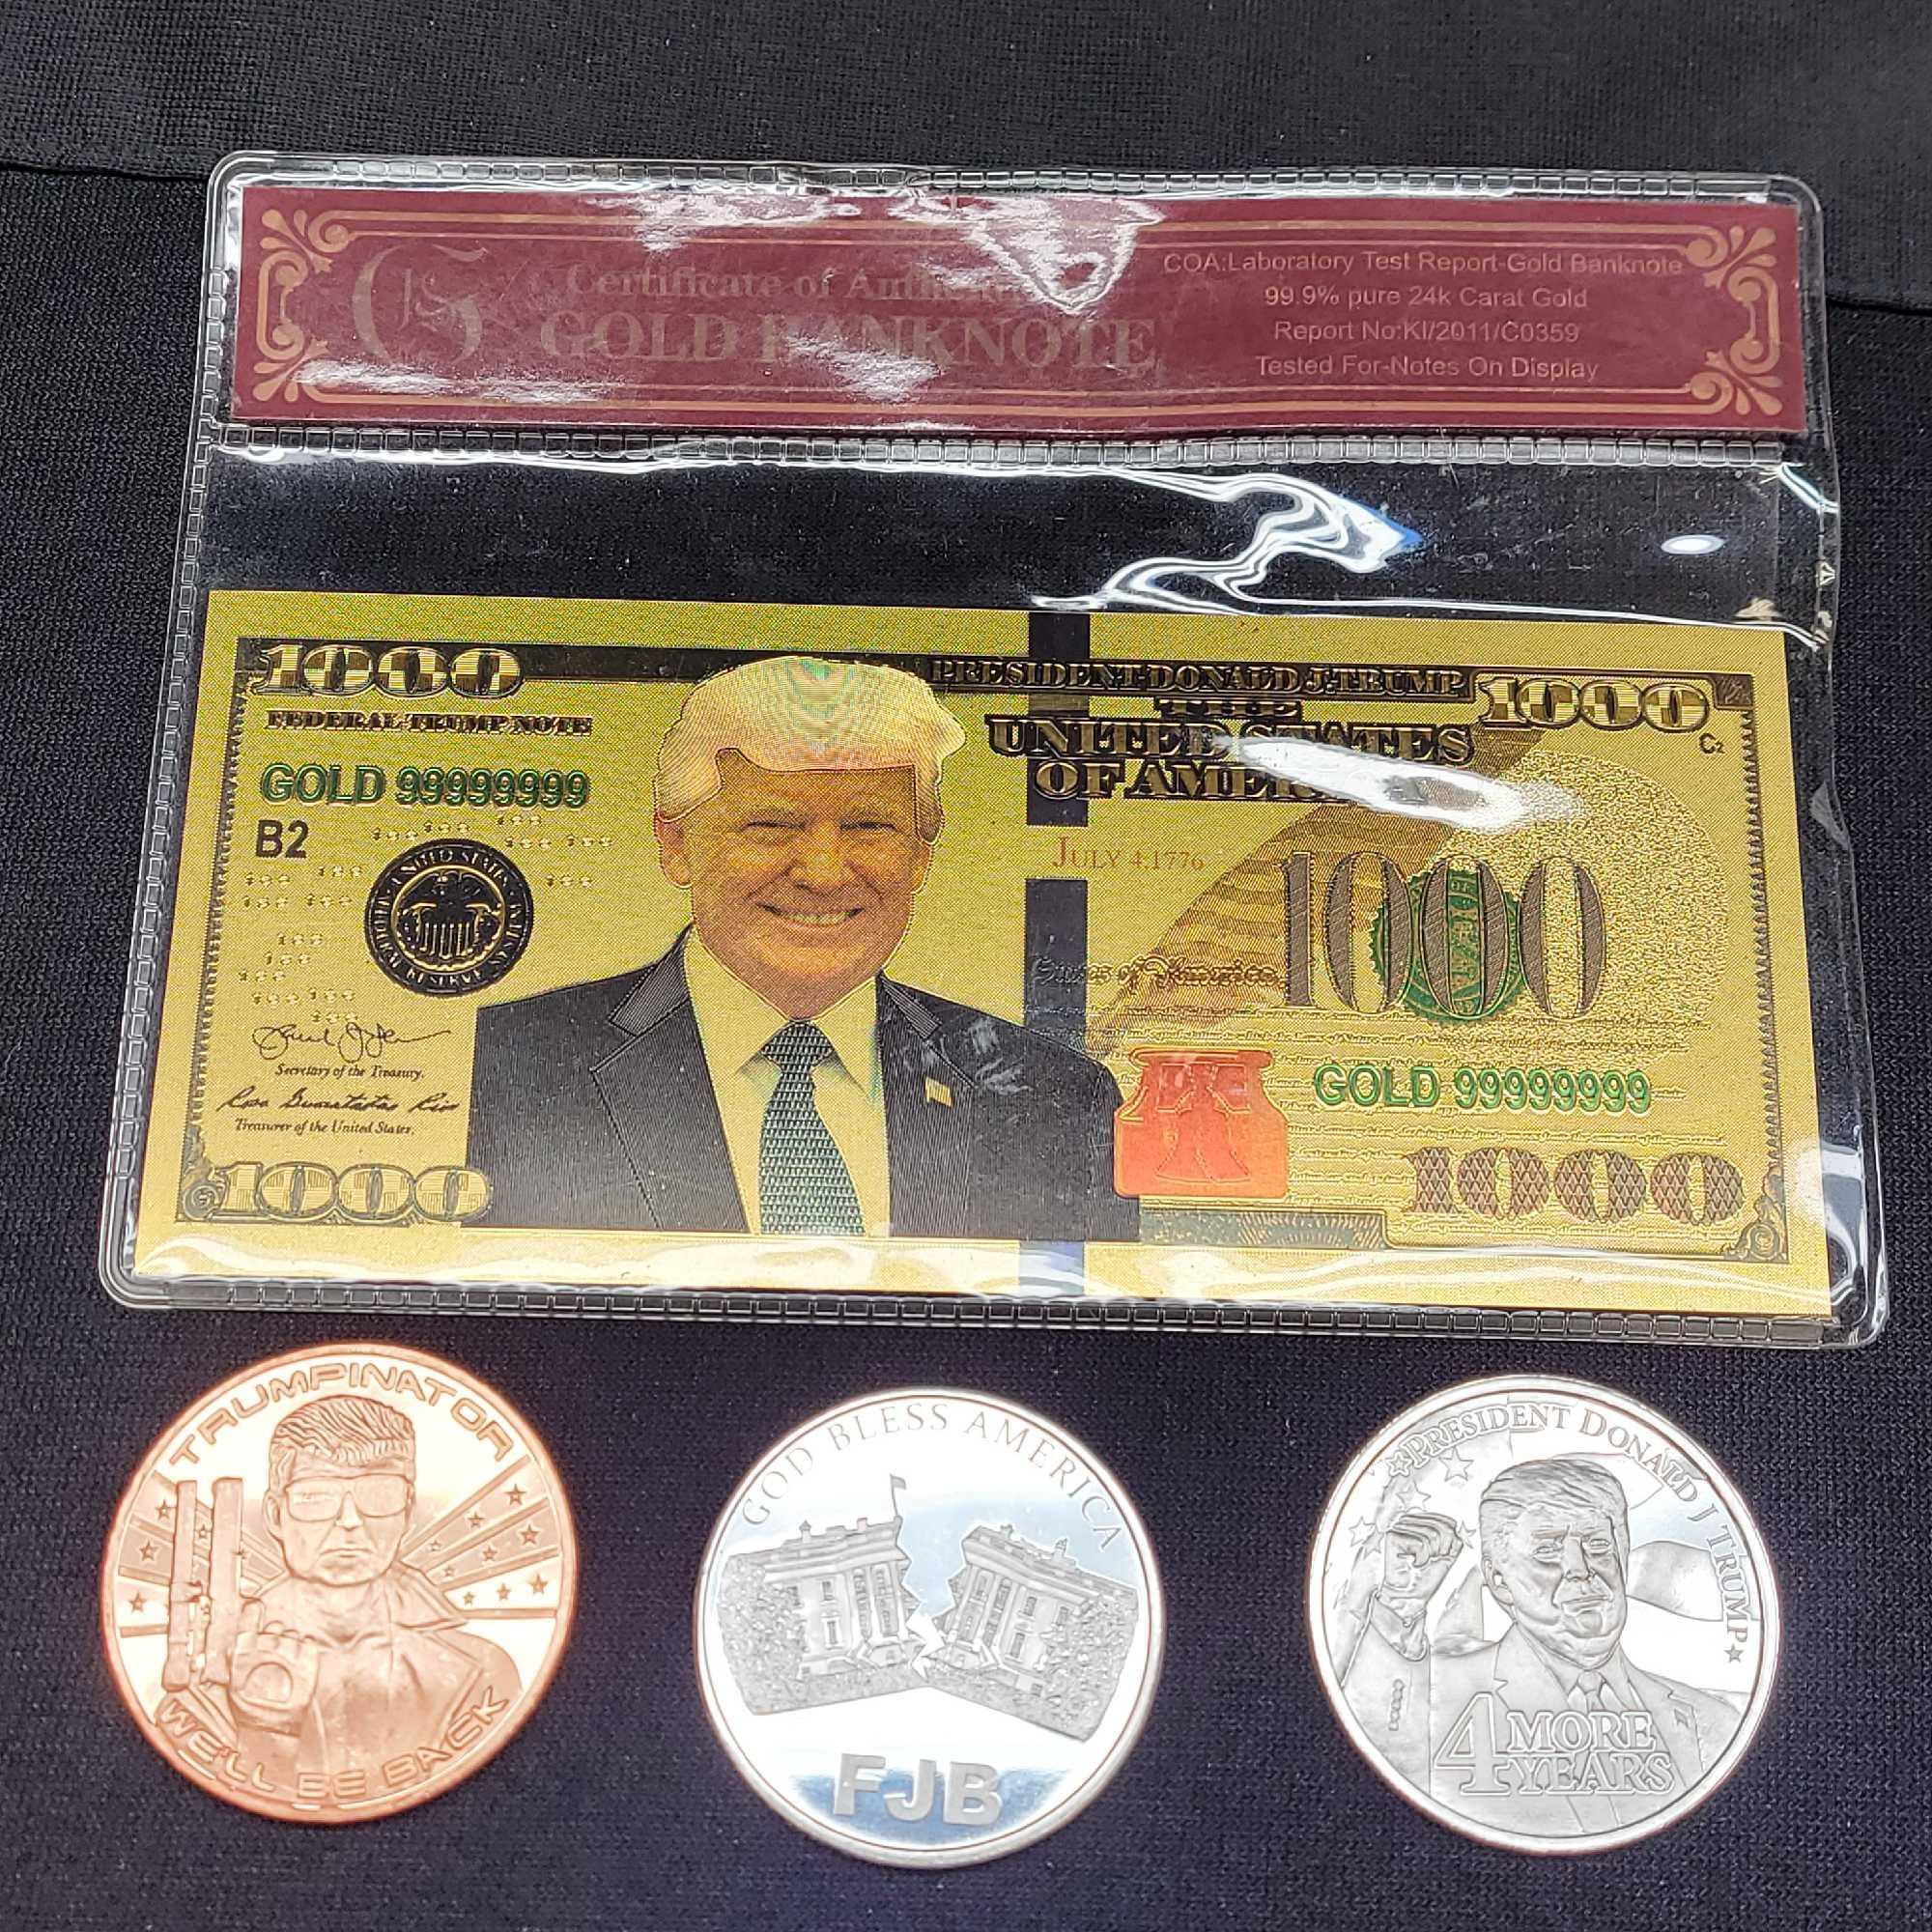 24K Gold, 2 Ounces .999 Silver and 1 Ounce Copper Donald Trump Coins and Currency Collection